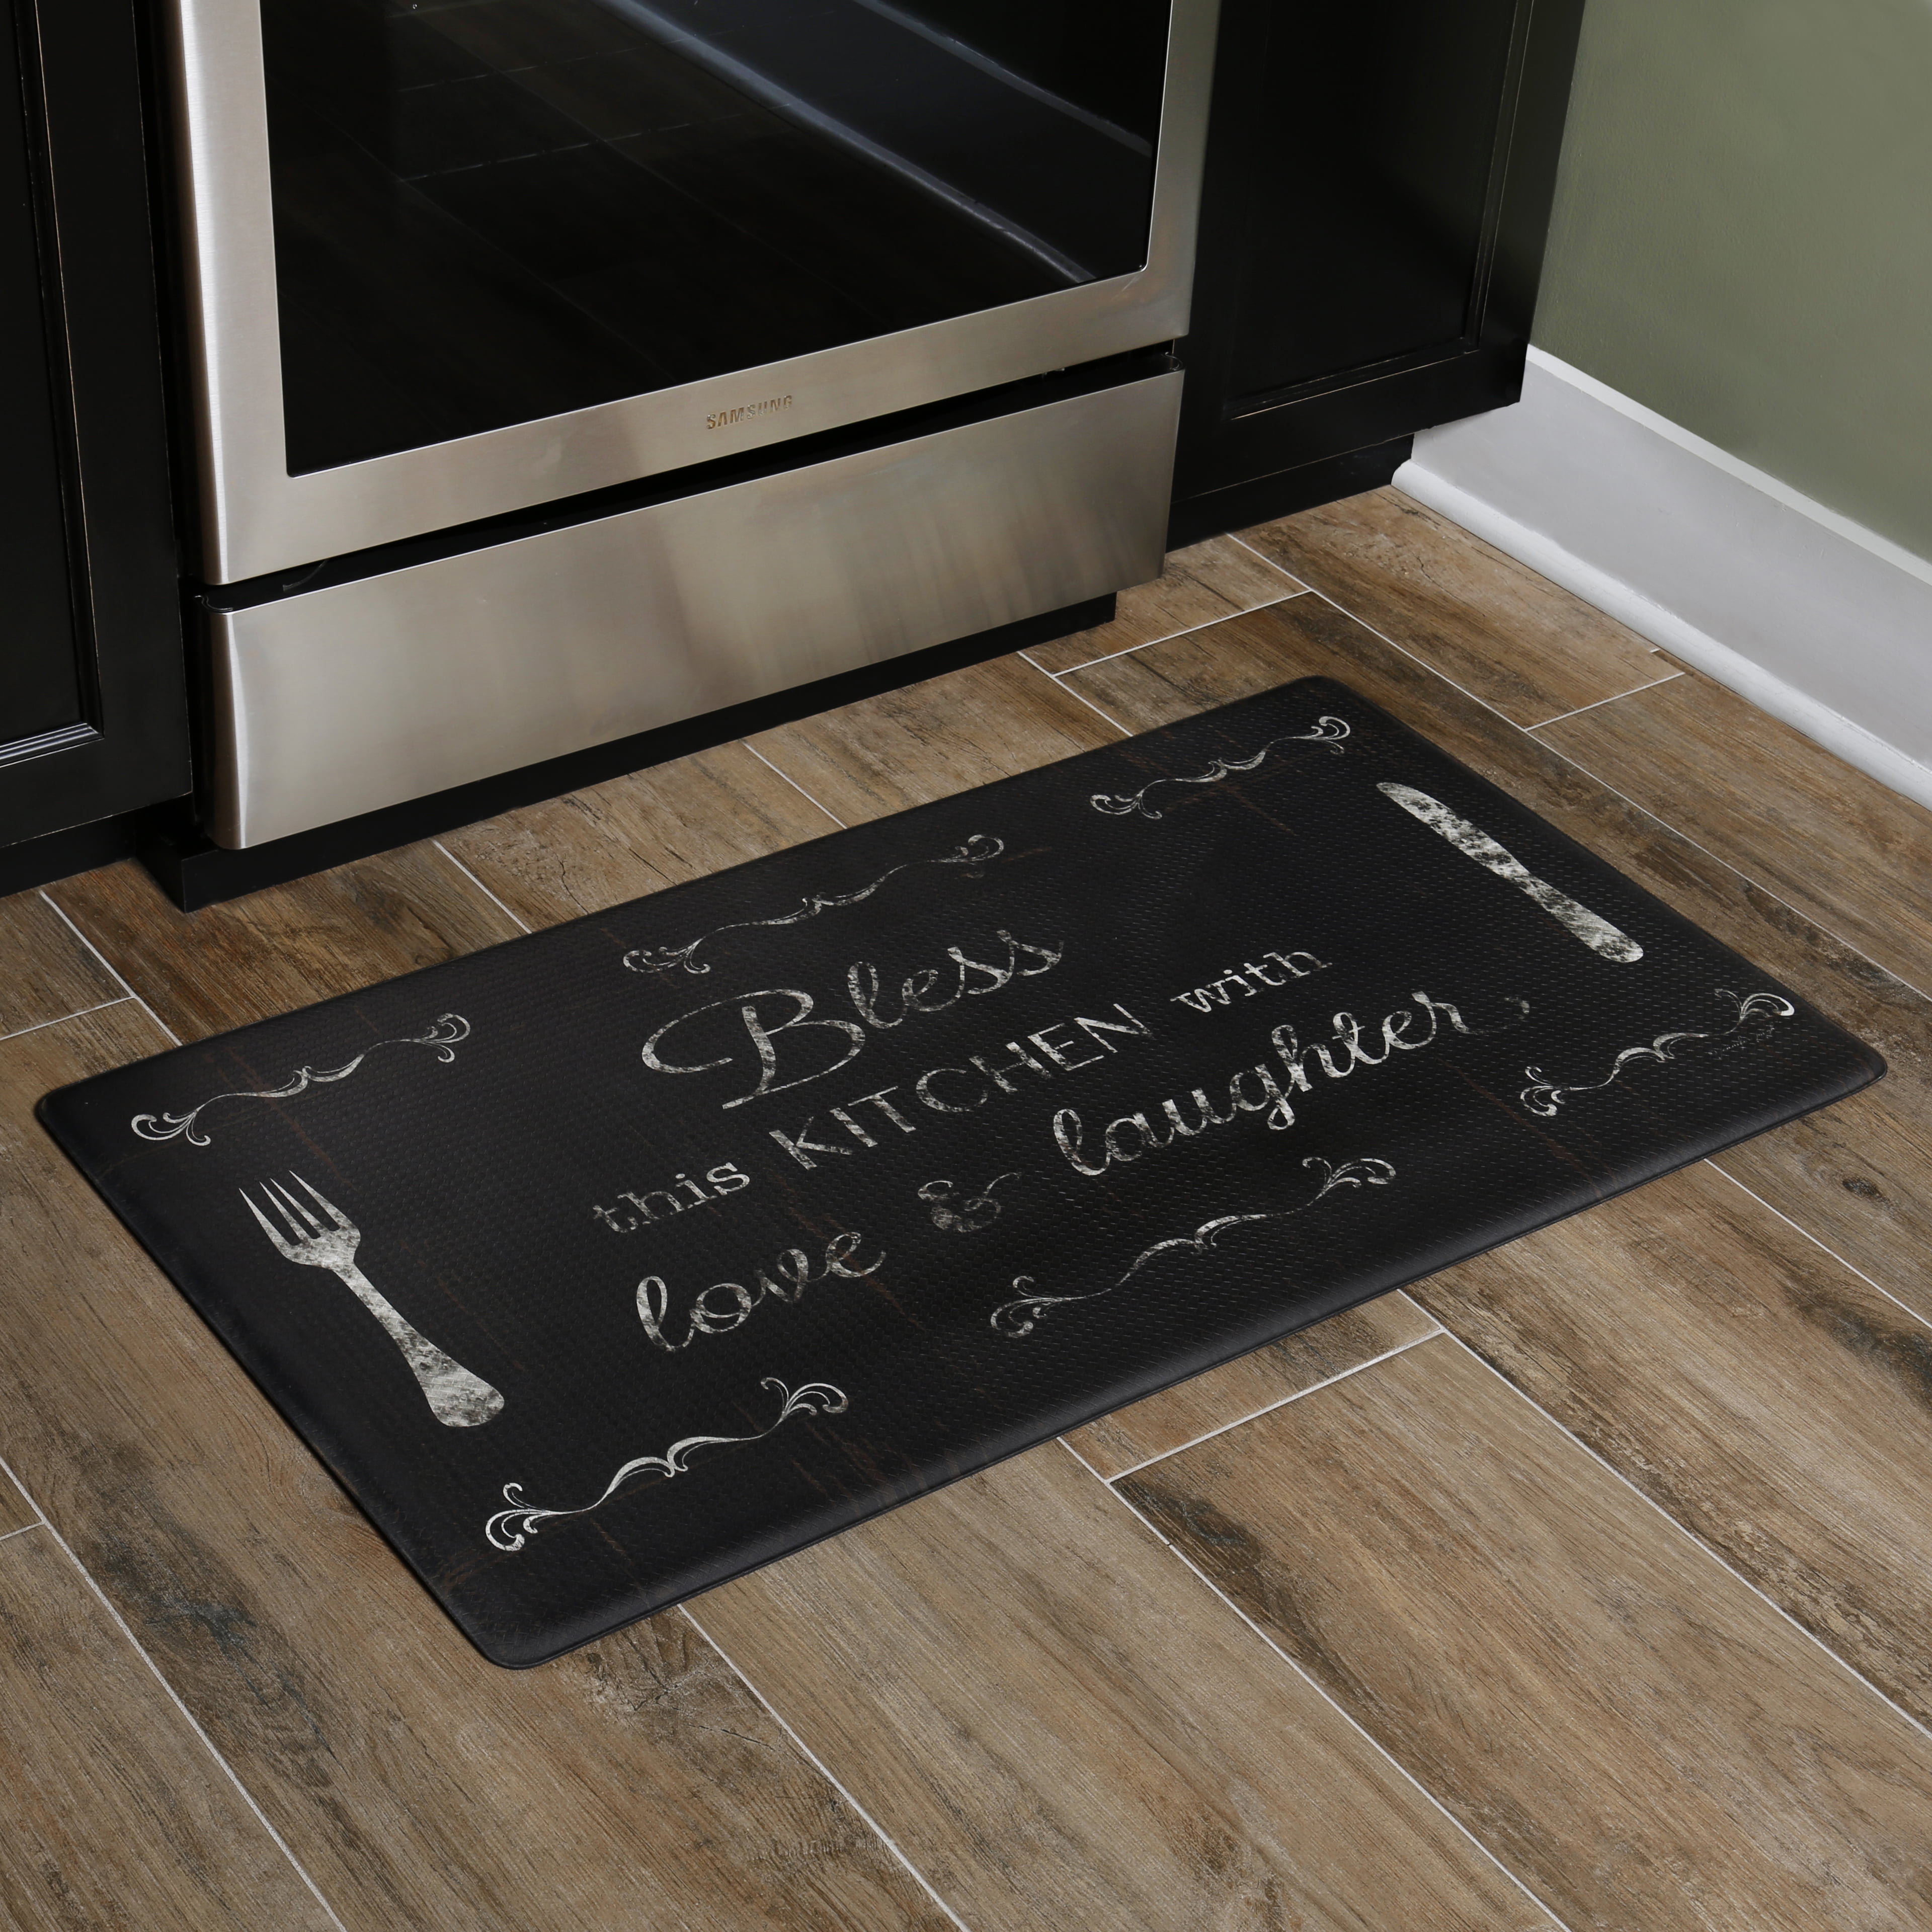 Take Cooking to the Next Level with Anti-Fatigue Kitchen Floor